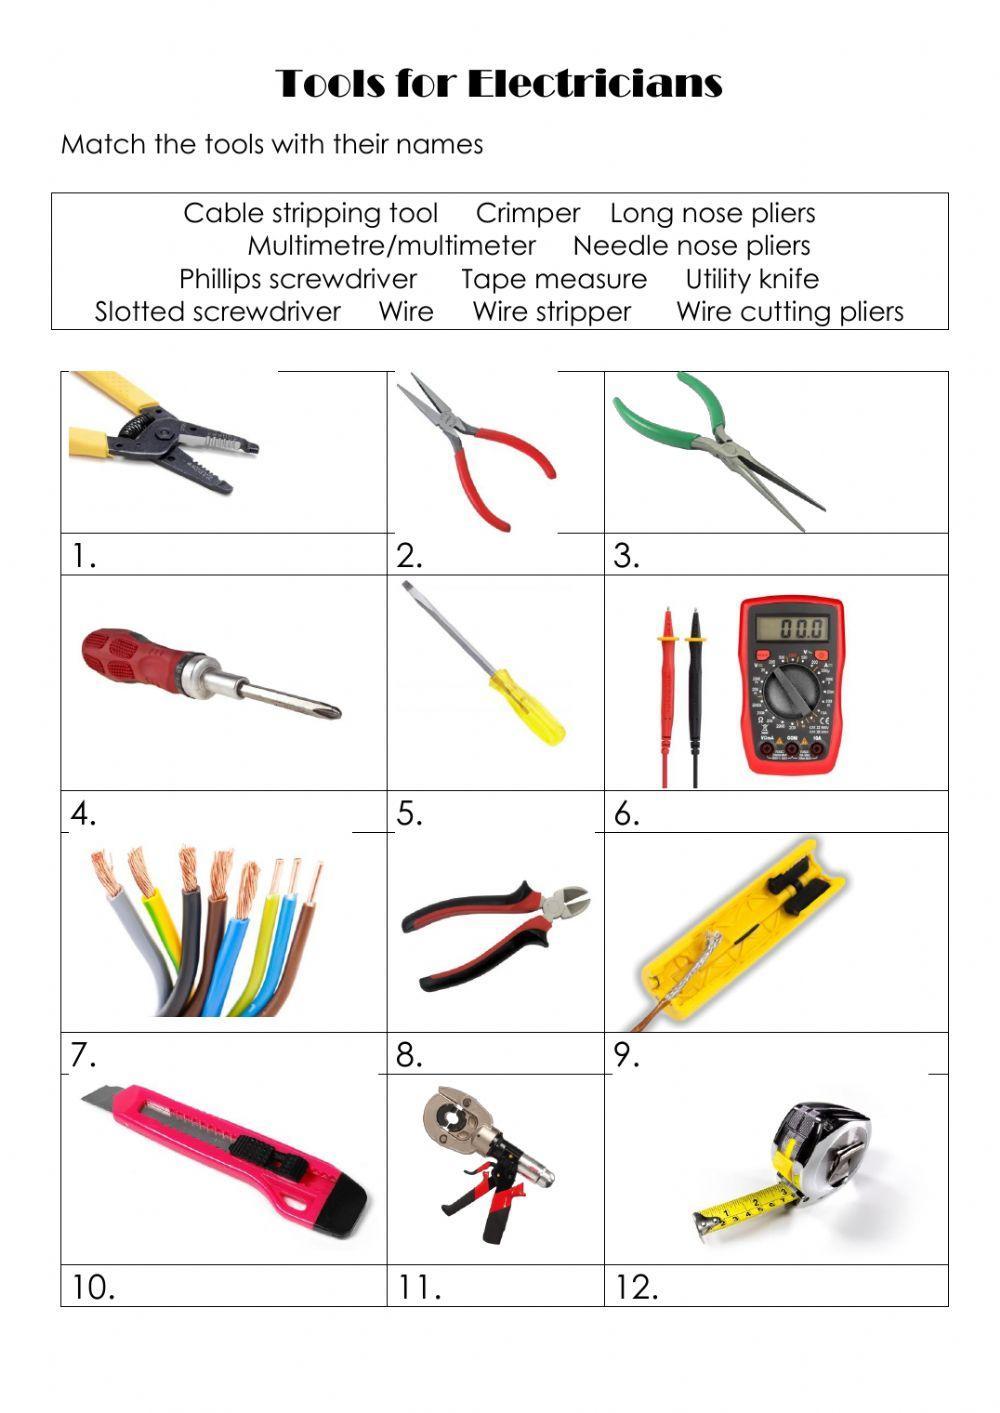 Tools for Electricians